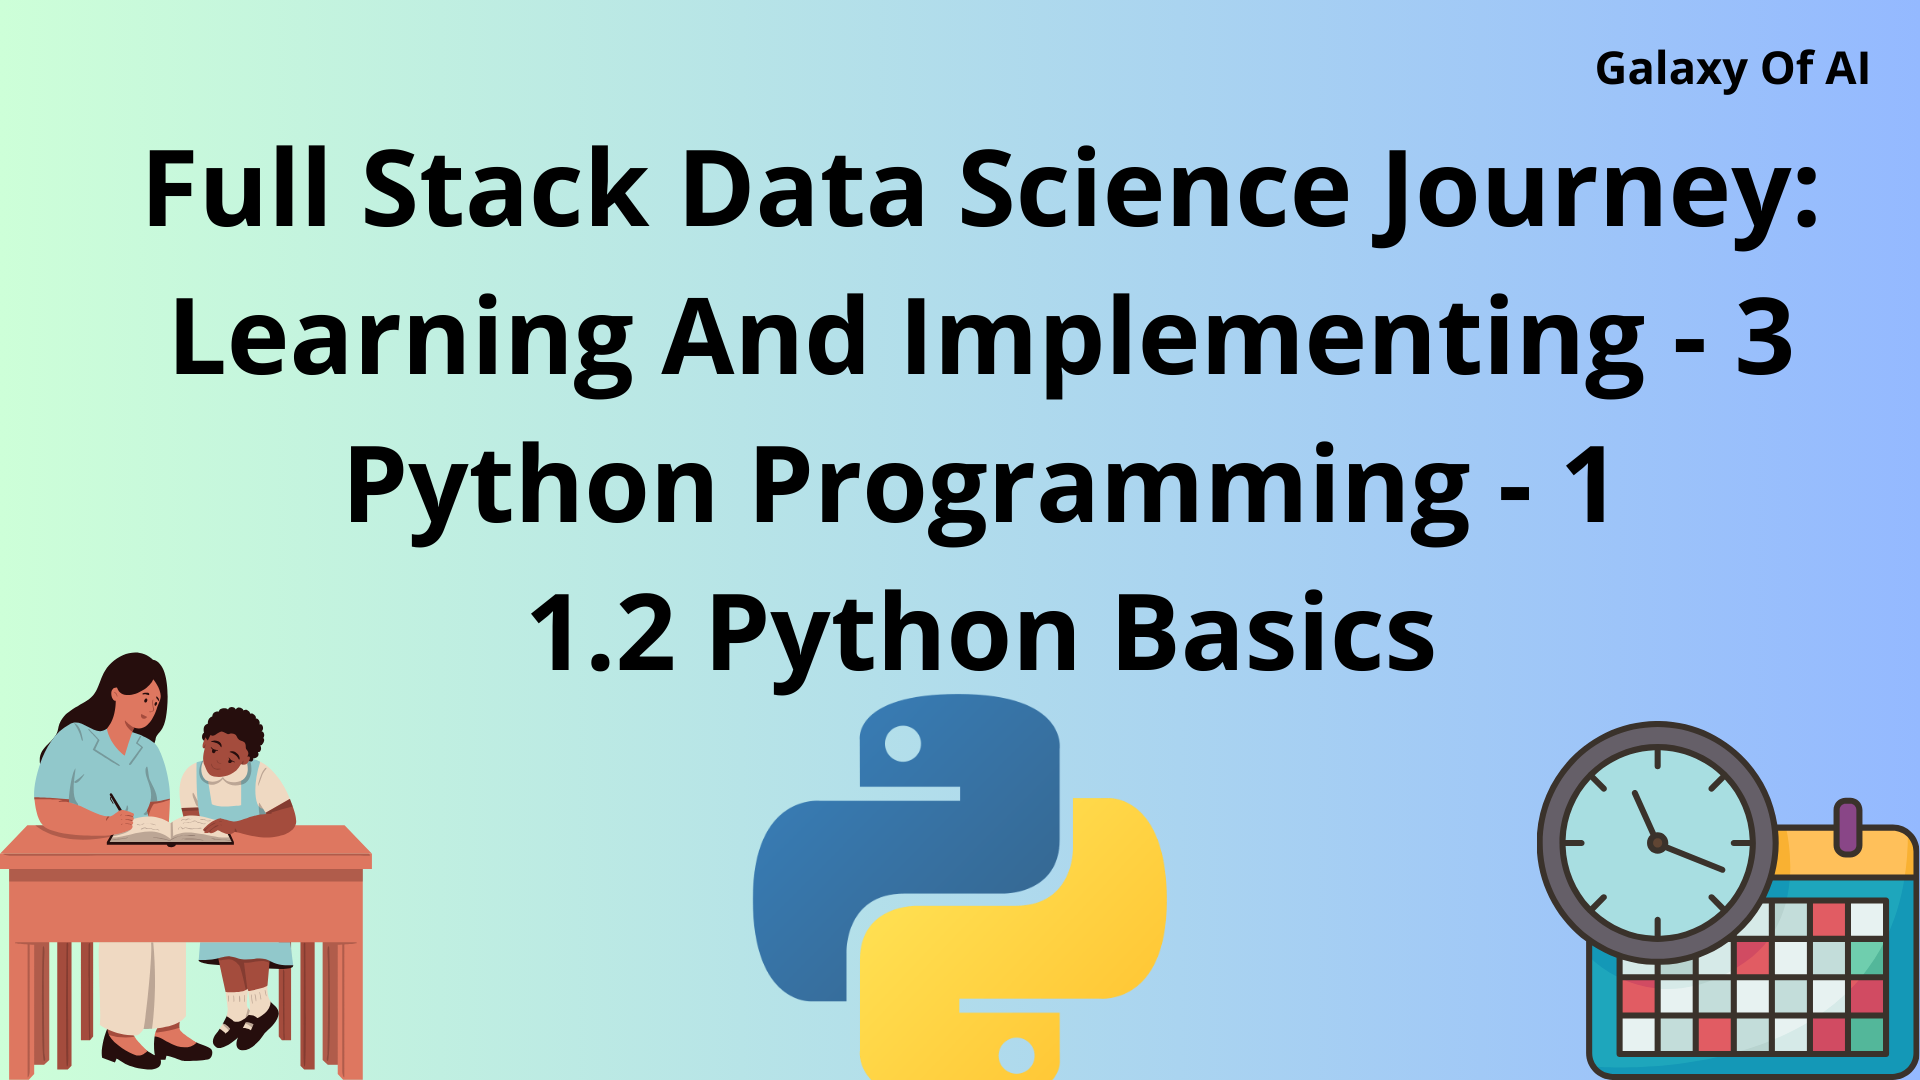 Full Stack Data Science Journey: Learning And Implementing - 3 Python Programming - 1 1.2 Python Basics